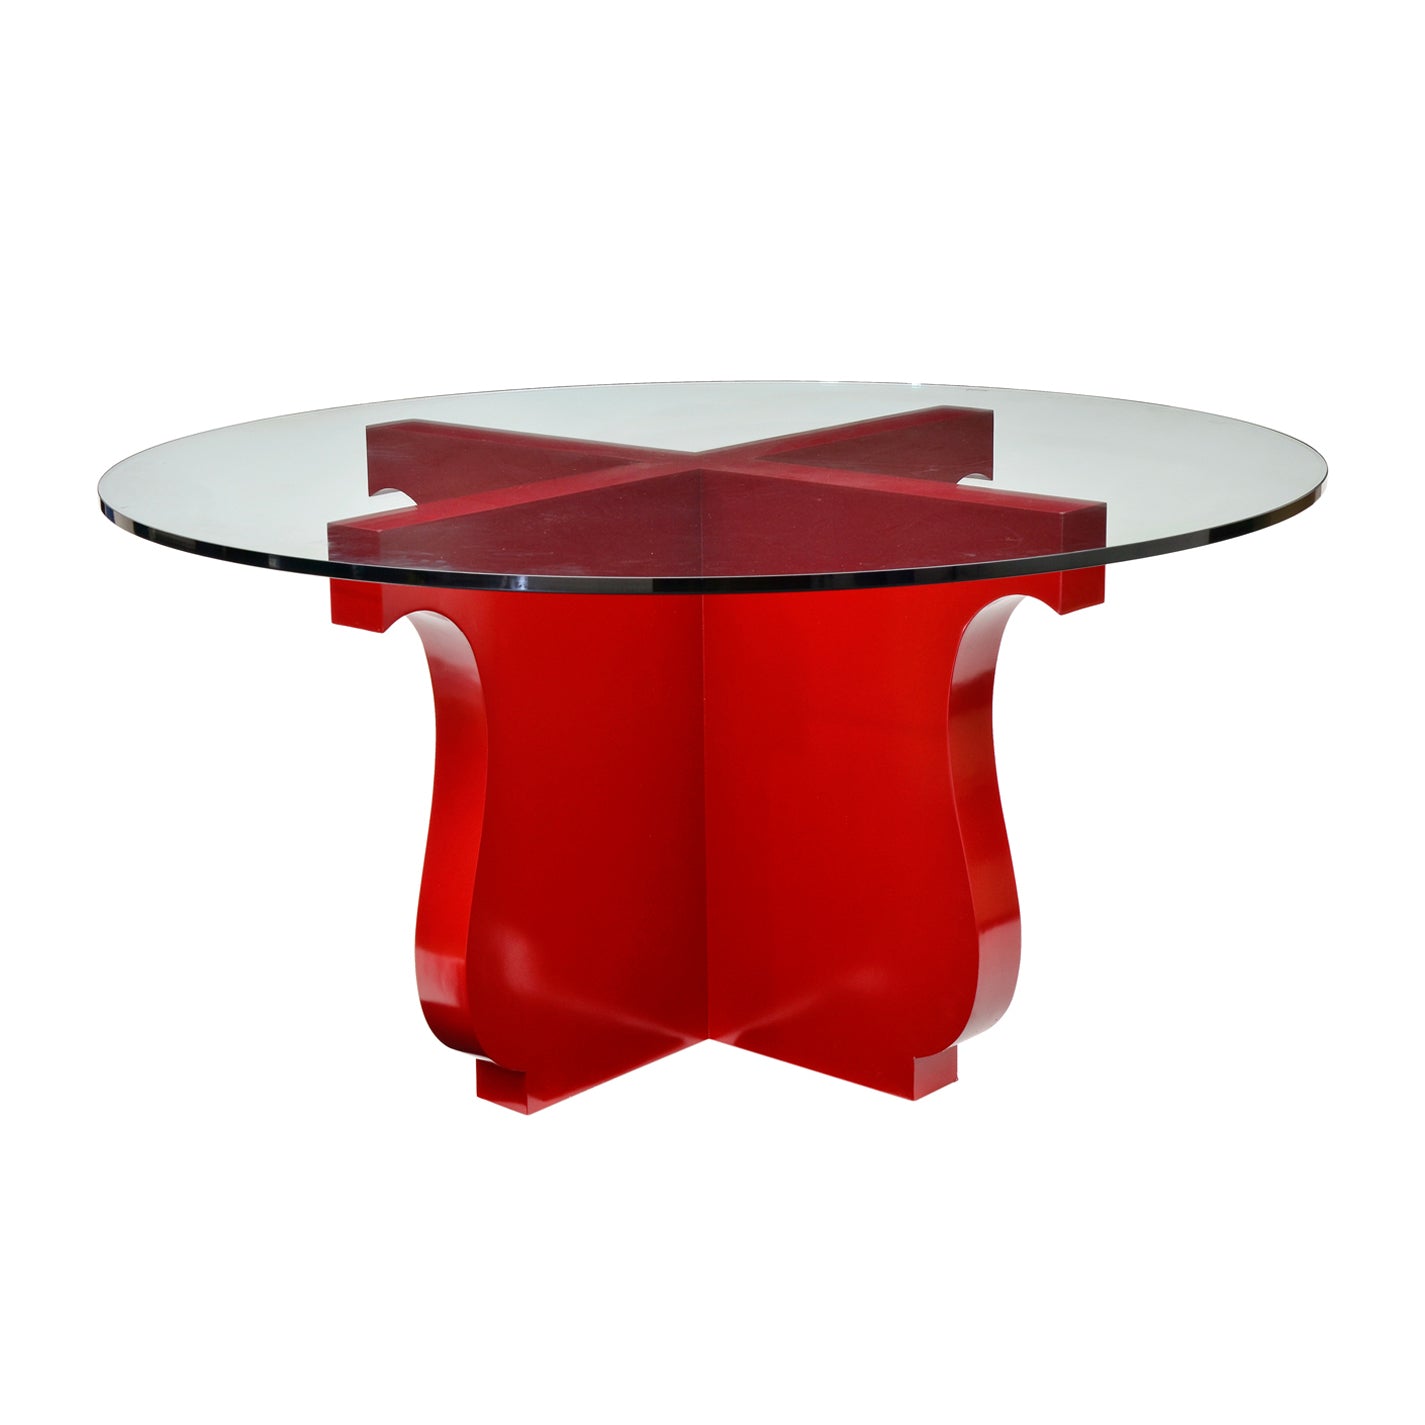 Lipstick Dining Table 